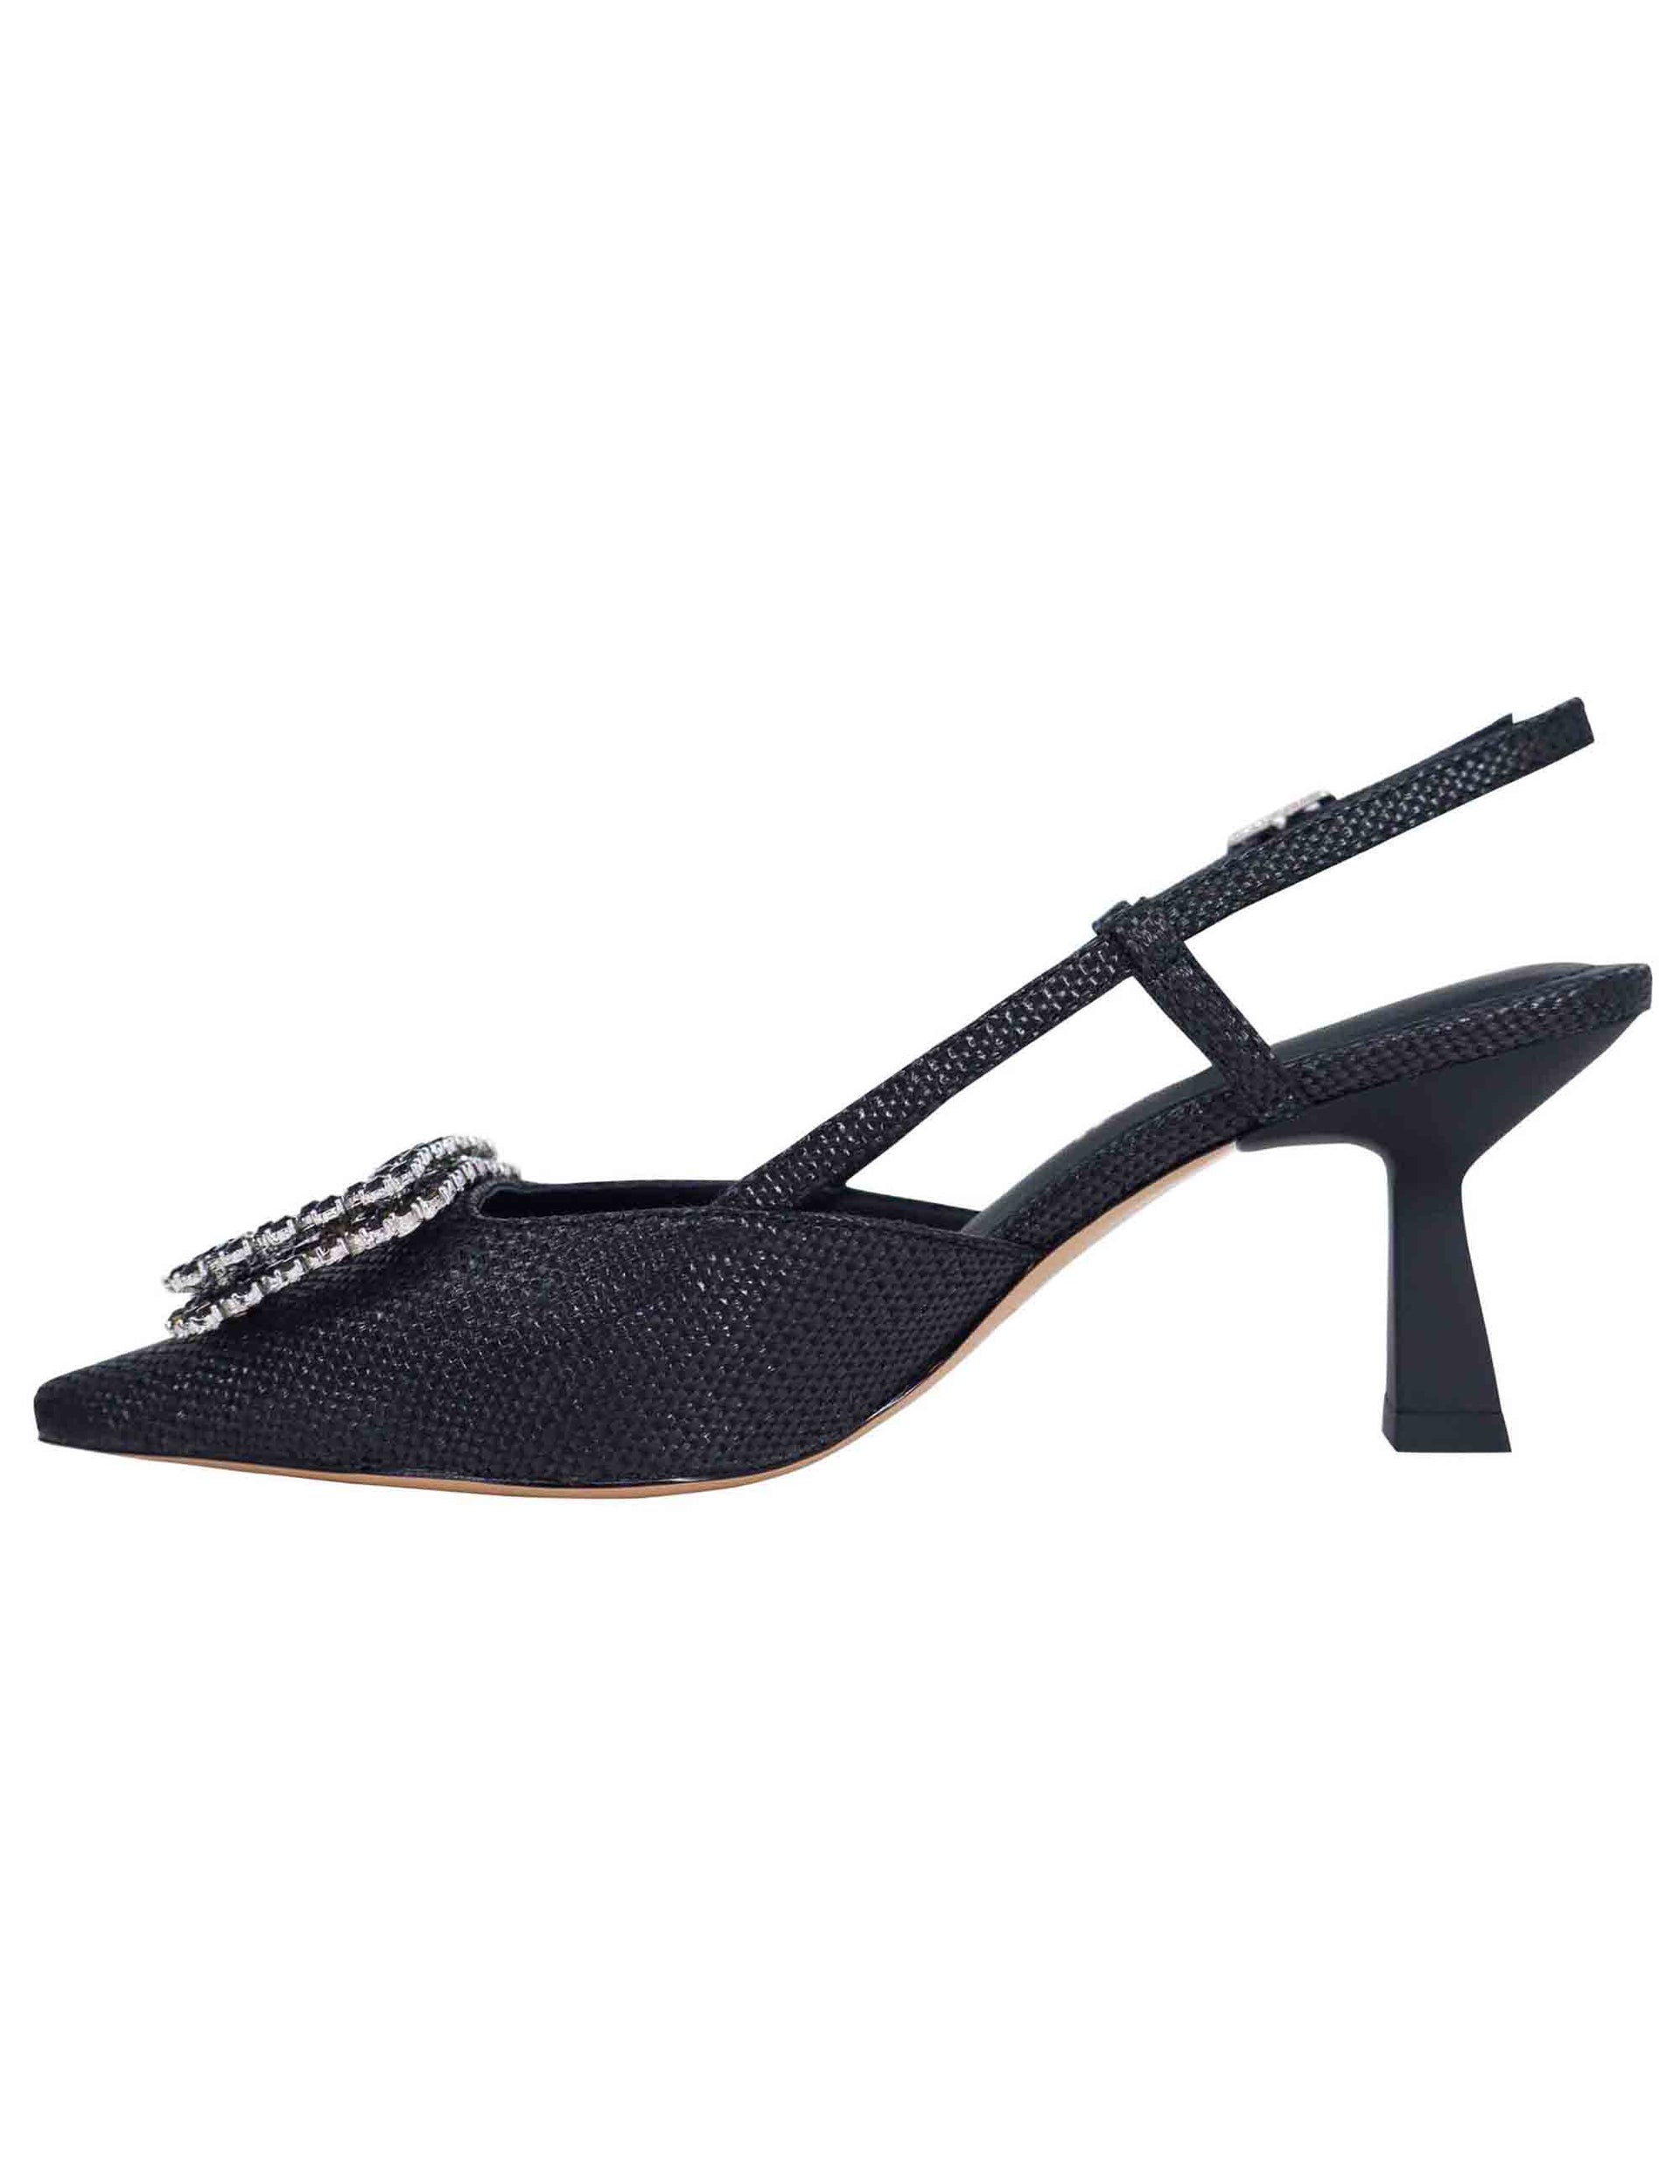 Women's slingback pumps in black fabric with rhinestone buckle and high heel